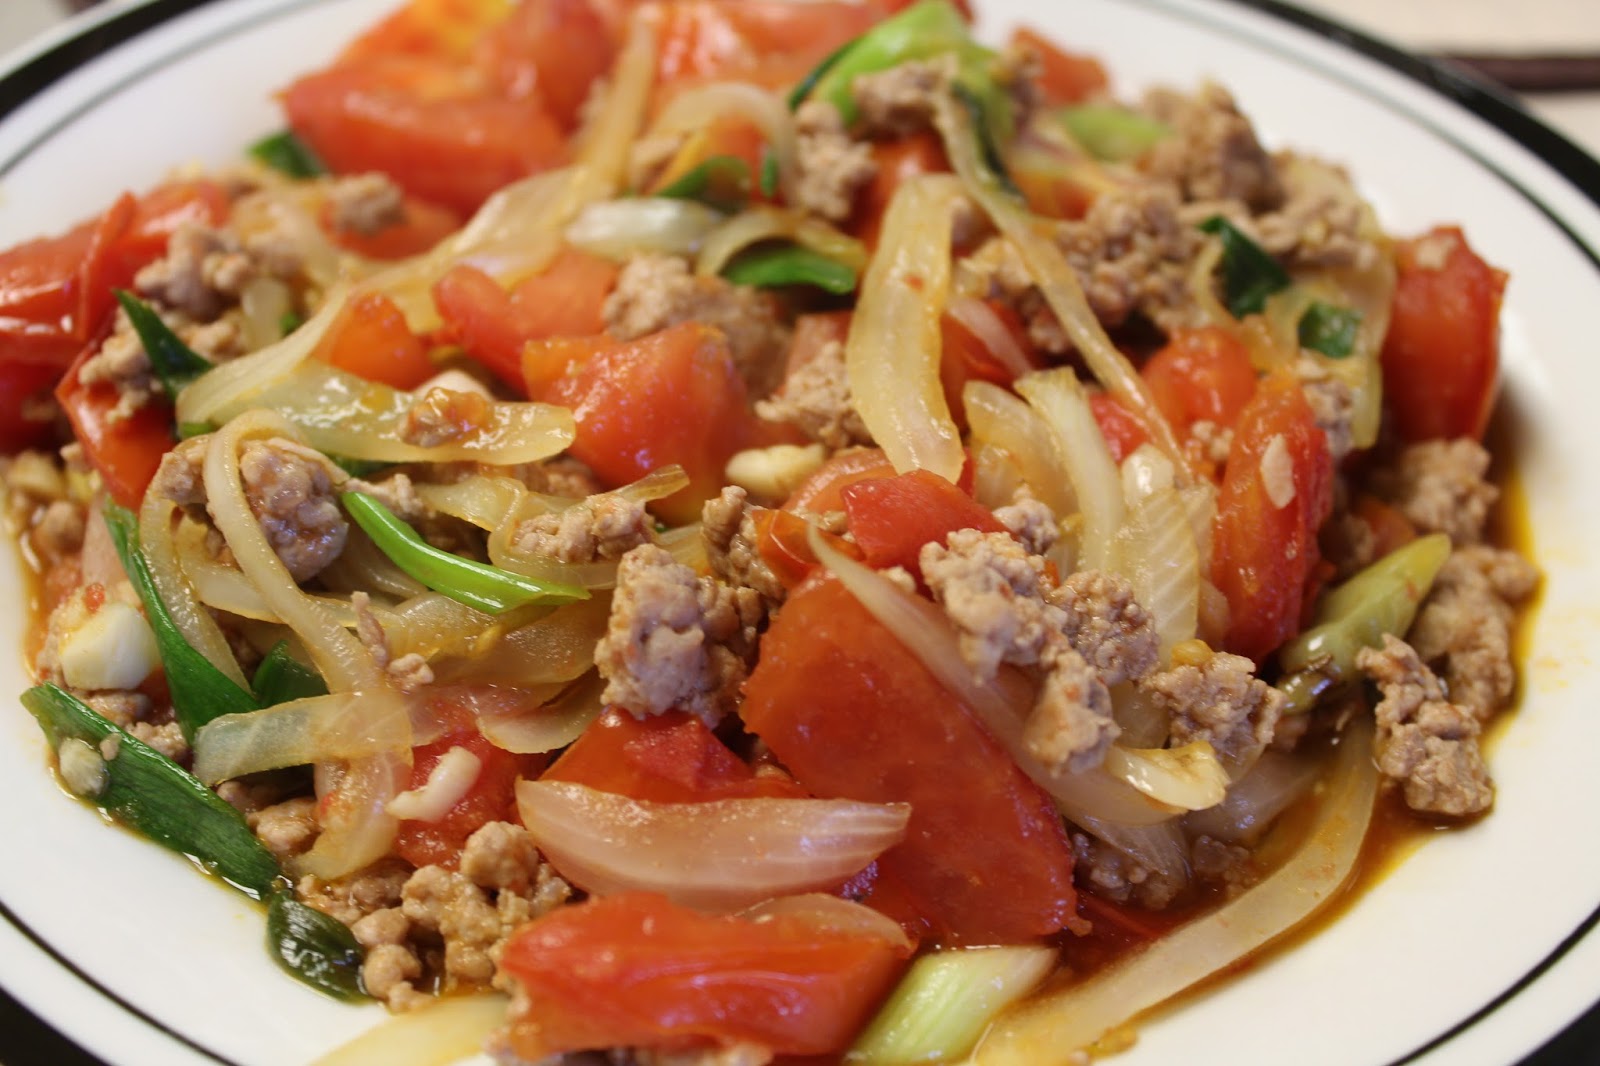 Pork stir-fry w/tomatoes and onions - Hmong style - Kathy Nom Nom